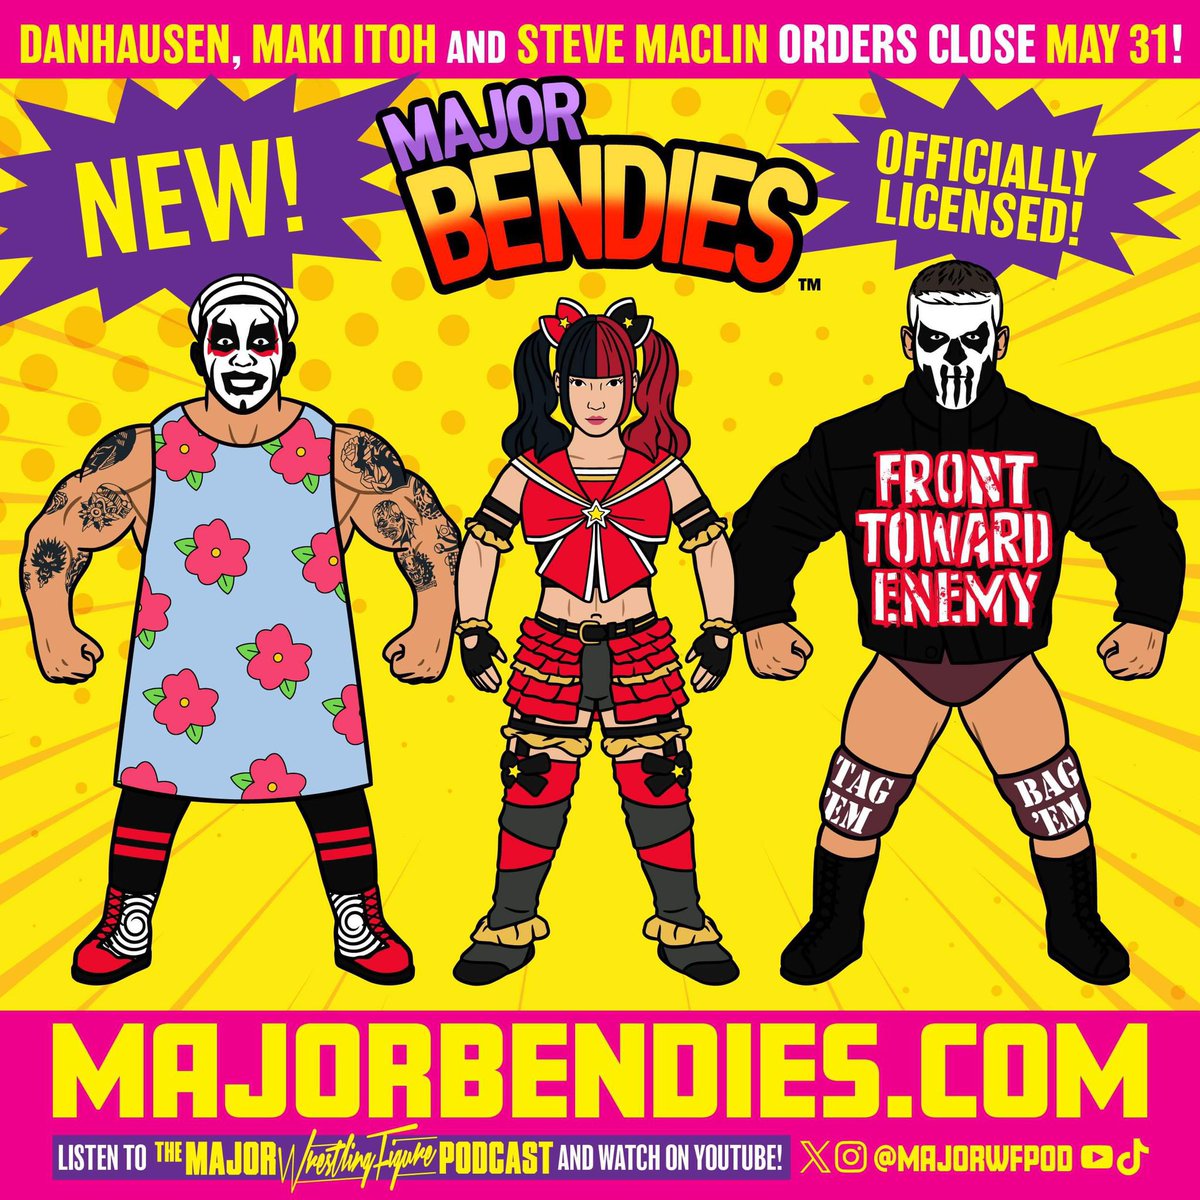 ORDER TODAY! FIRST TIME EVER figures for @SteveMaclin & @making_itoh! A first time ever look for @DanhausenAD in figure form! The pre-order is the order! @majorwfpod MajorBendies.com